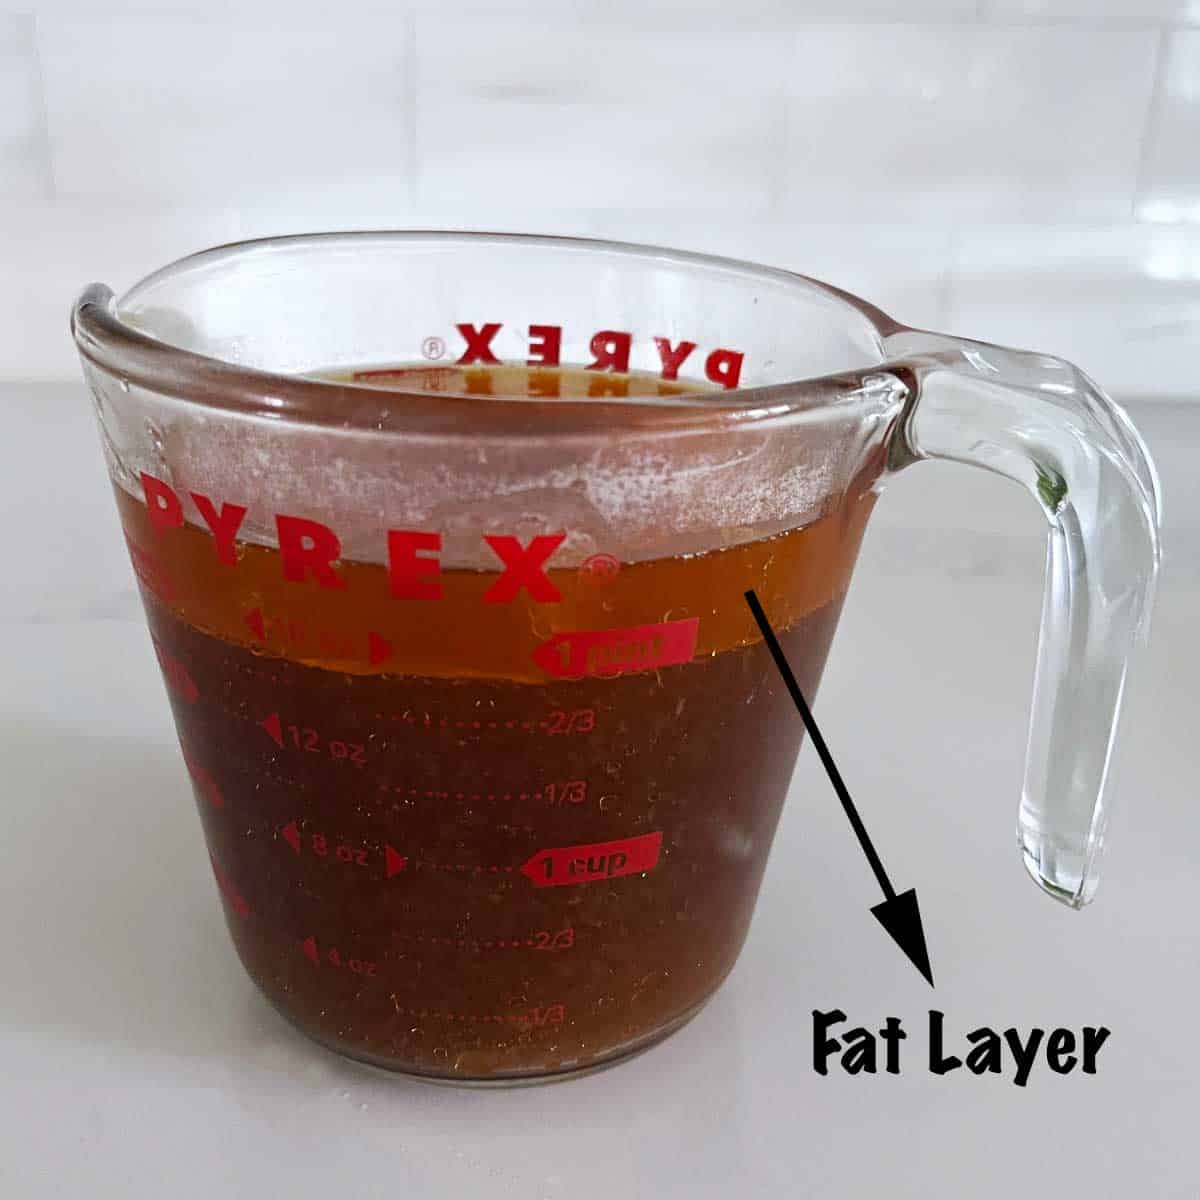 The fat layer on top of the cooking liquids.